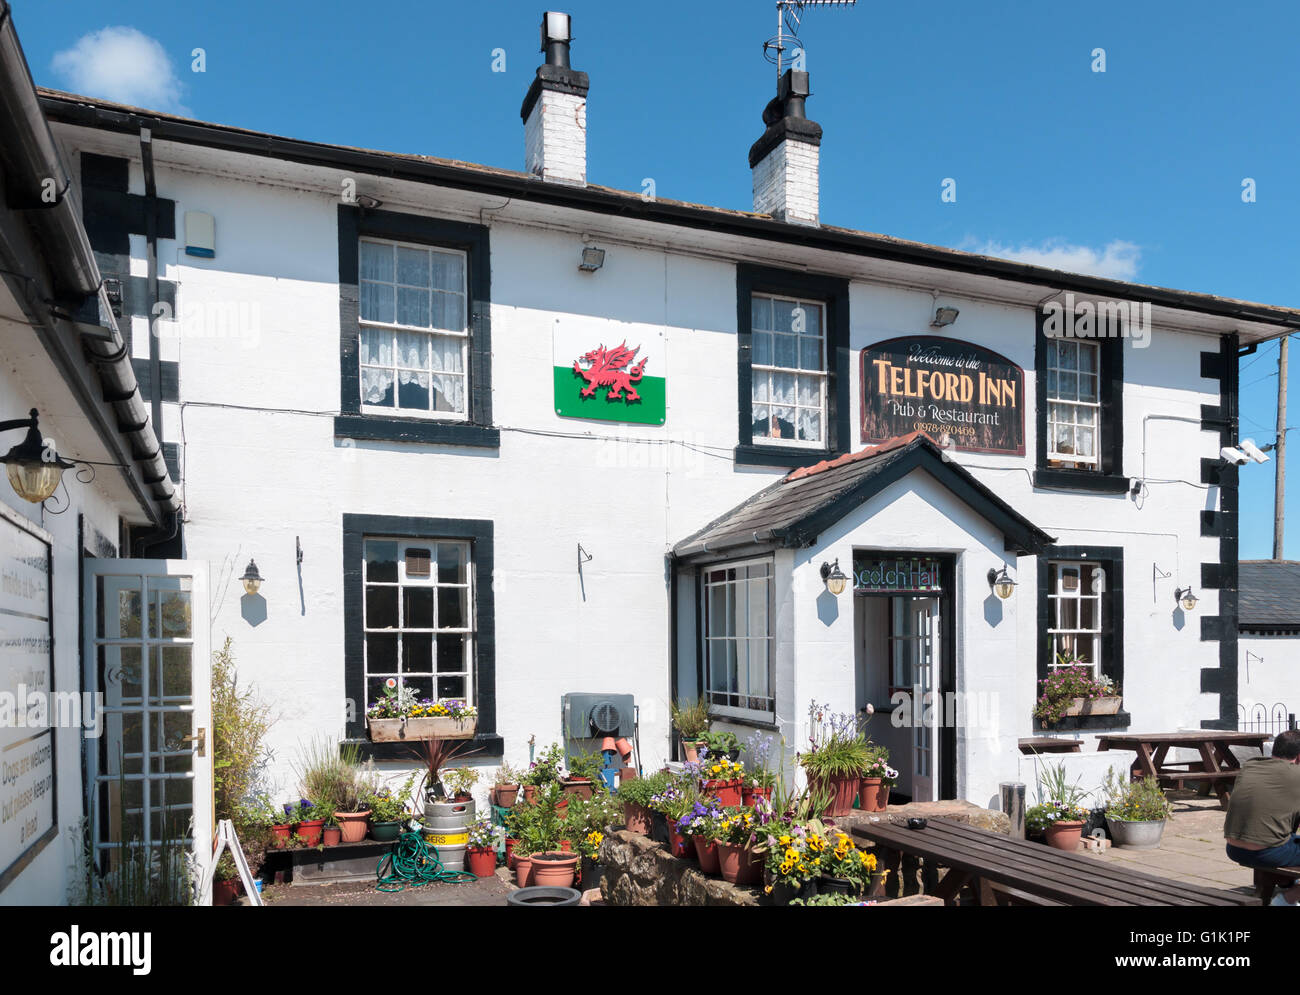 The Telford Inn built in the 18th century as a house for the supervisor of the construction of Pontcysyllte aqueduct Stock Photo